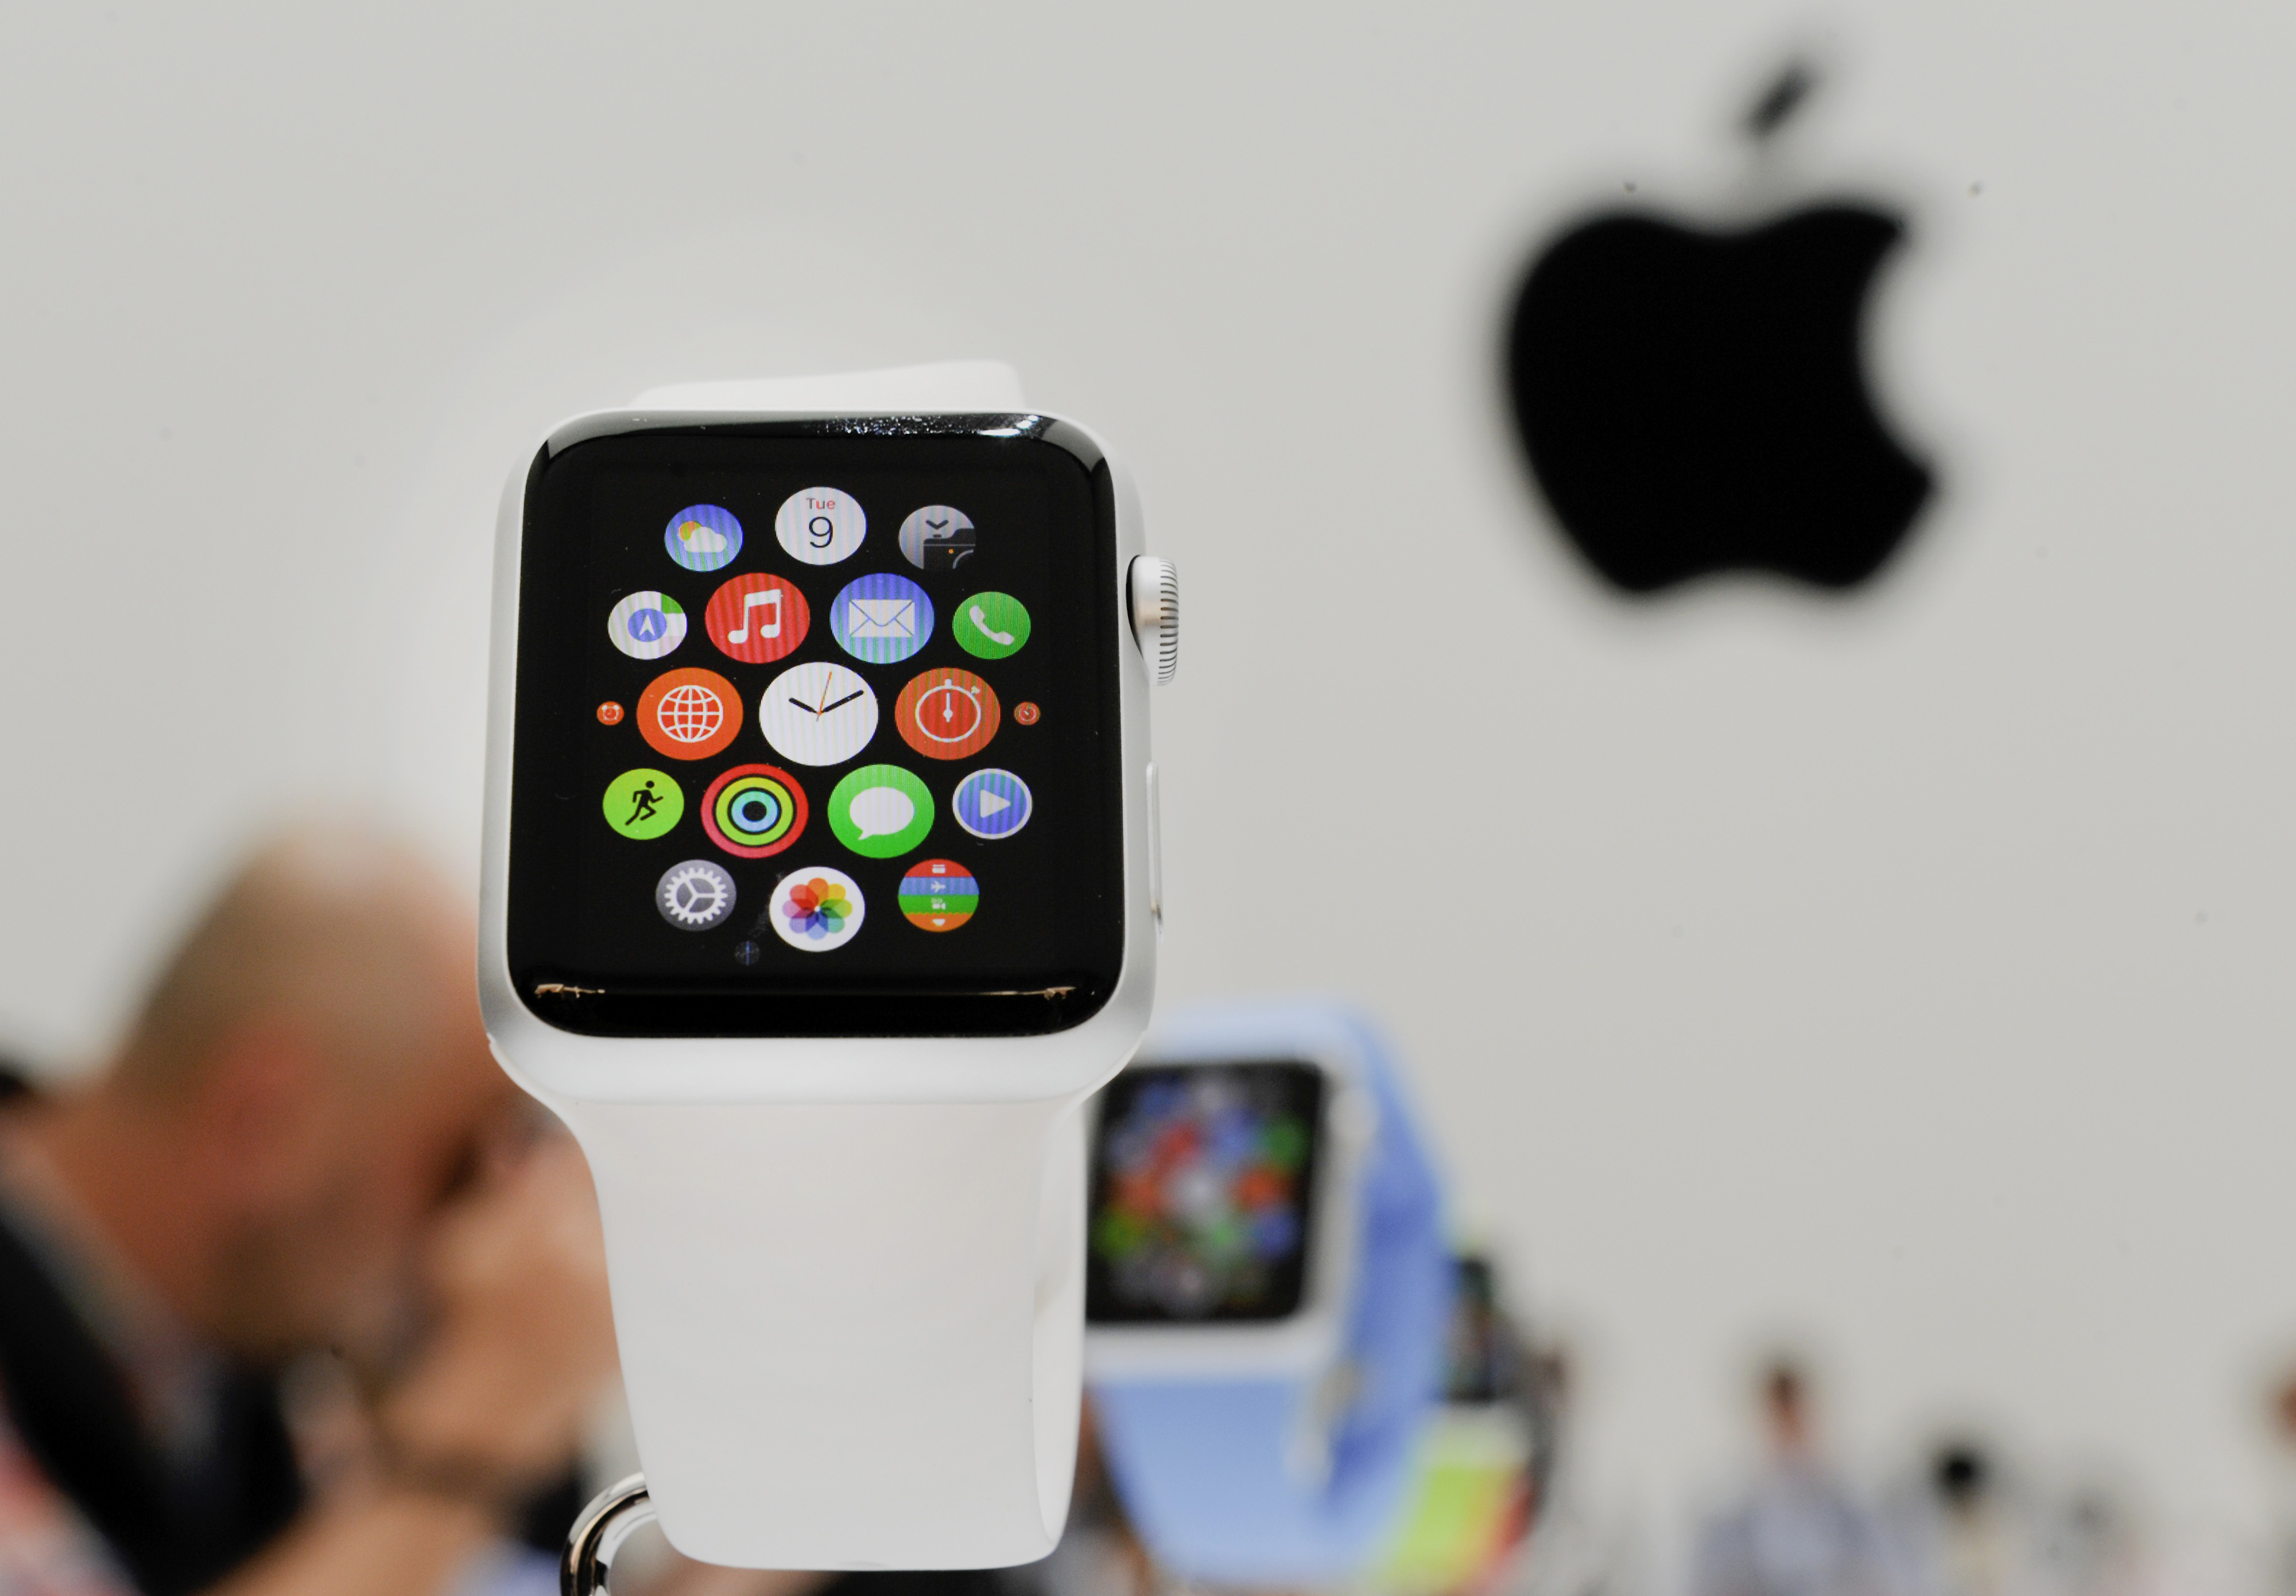 The Apple Watch is displayed after a product announcement at Flint Center in Cupertino, California, U.S., on Tuesday, Sept. 9, 2014. (Bloomberg&mdash;Bloomberg via Getty Images)